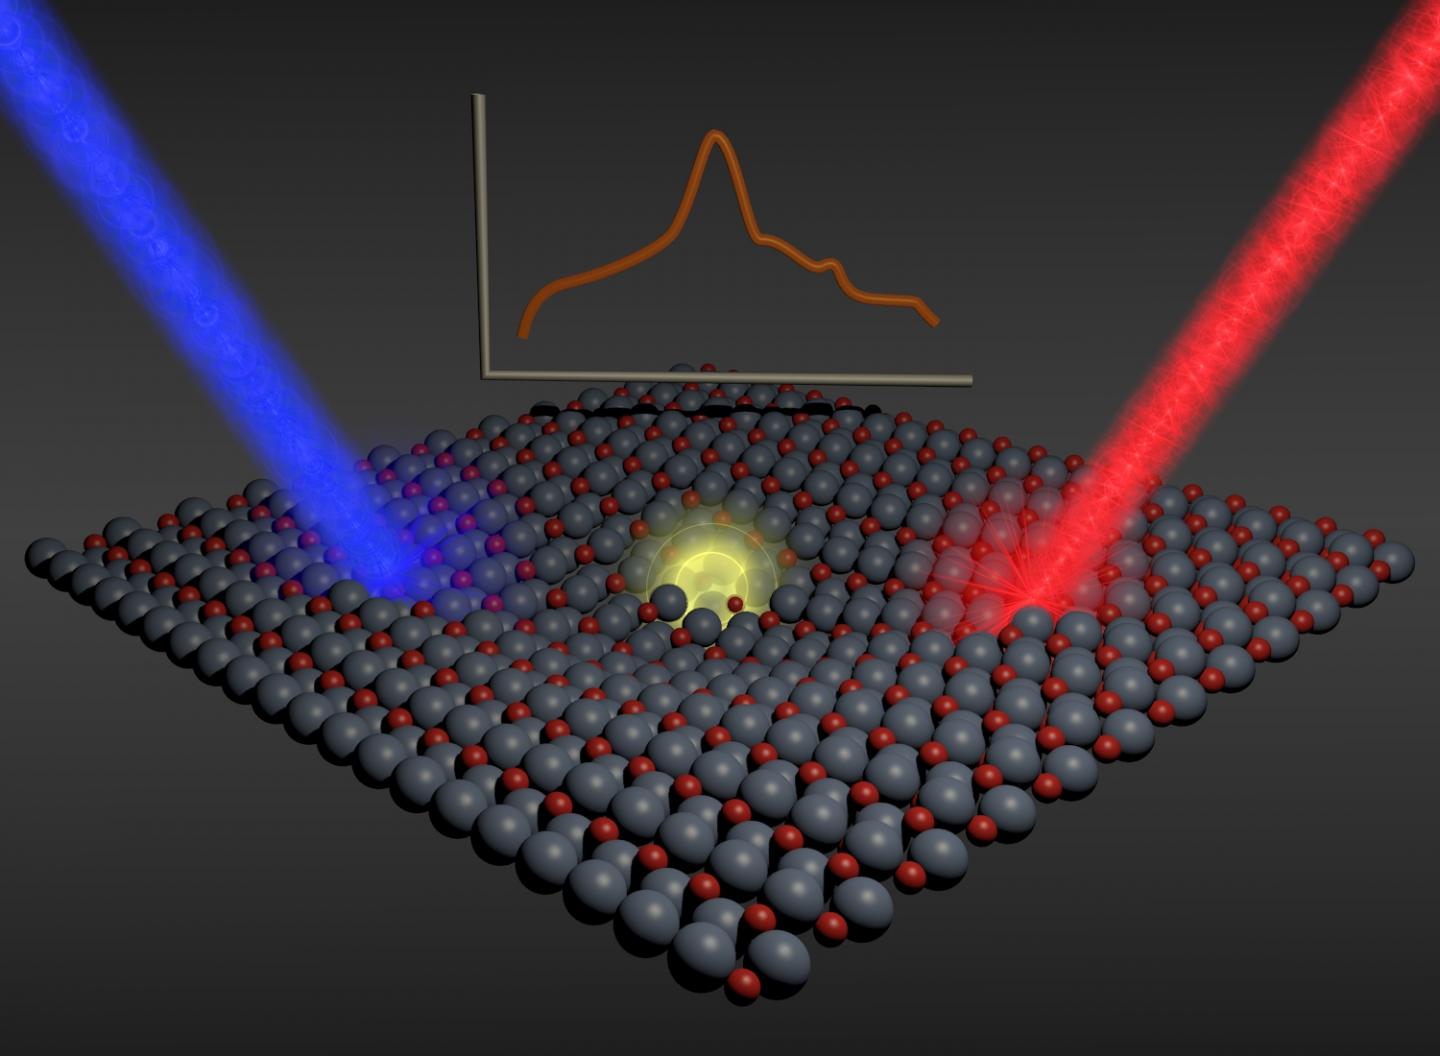 Pseudoparticles Travel through Photoactive Material